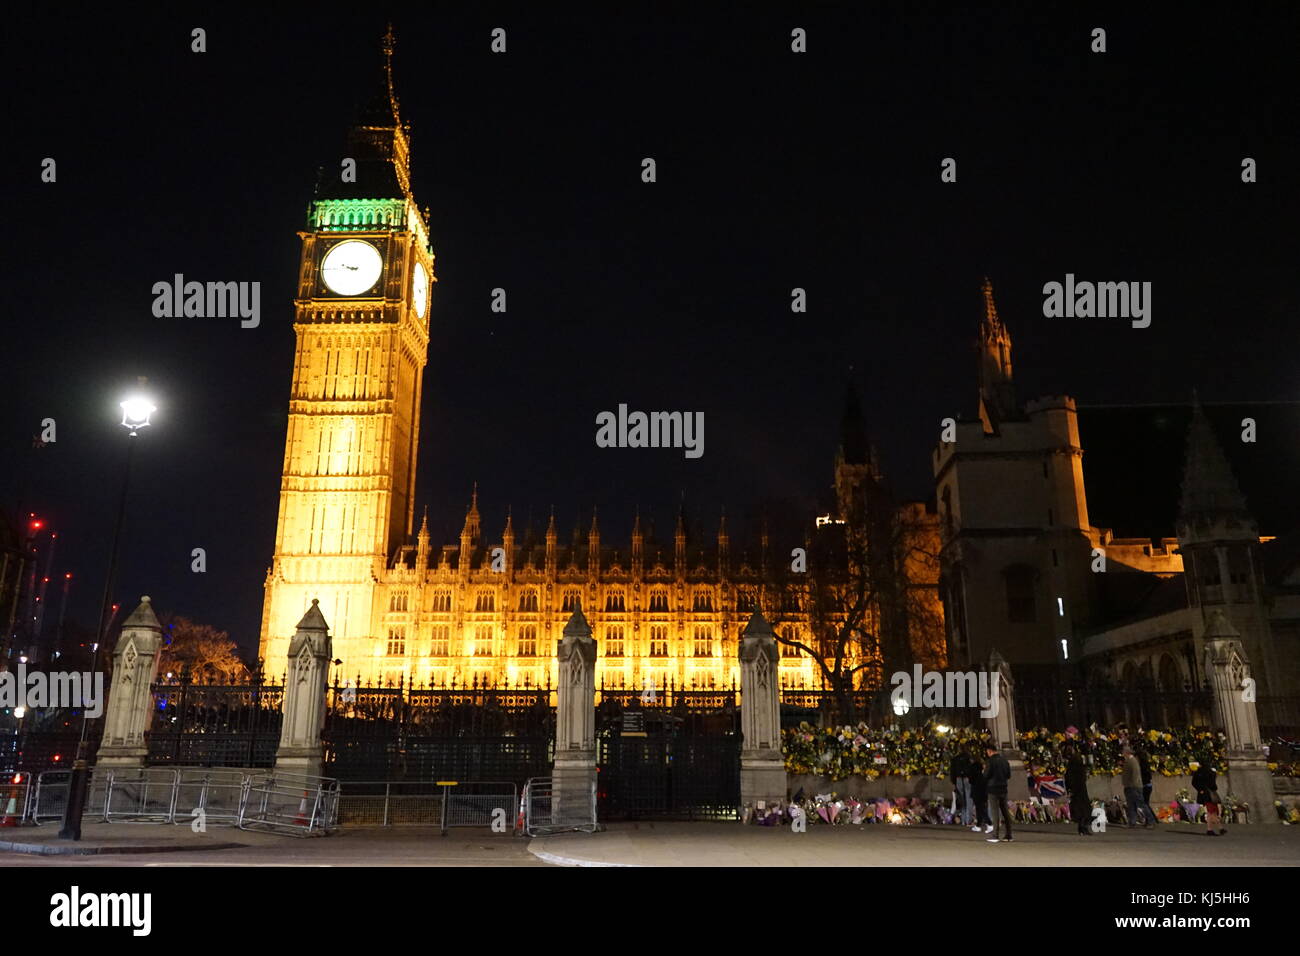 Tributes at Westminster in London following the 22 March 2017, a terrorist attack in the vicinity of the Palace of Westminster in London, seat of the British Parliament. Stock Photo